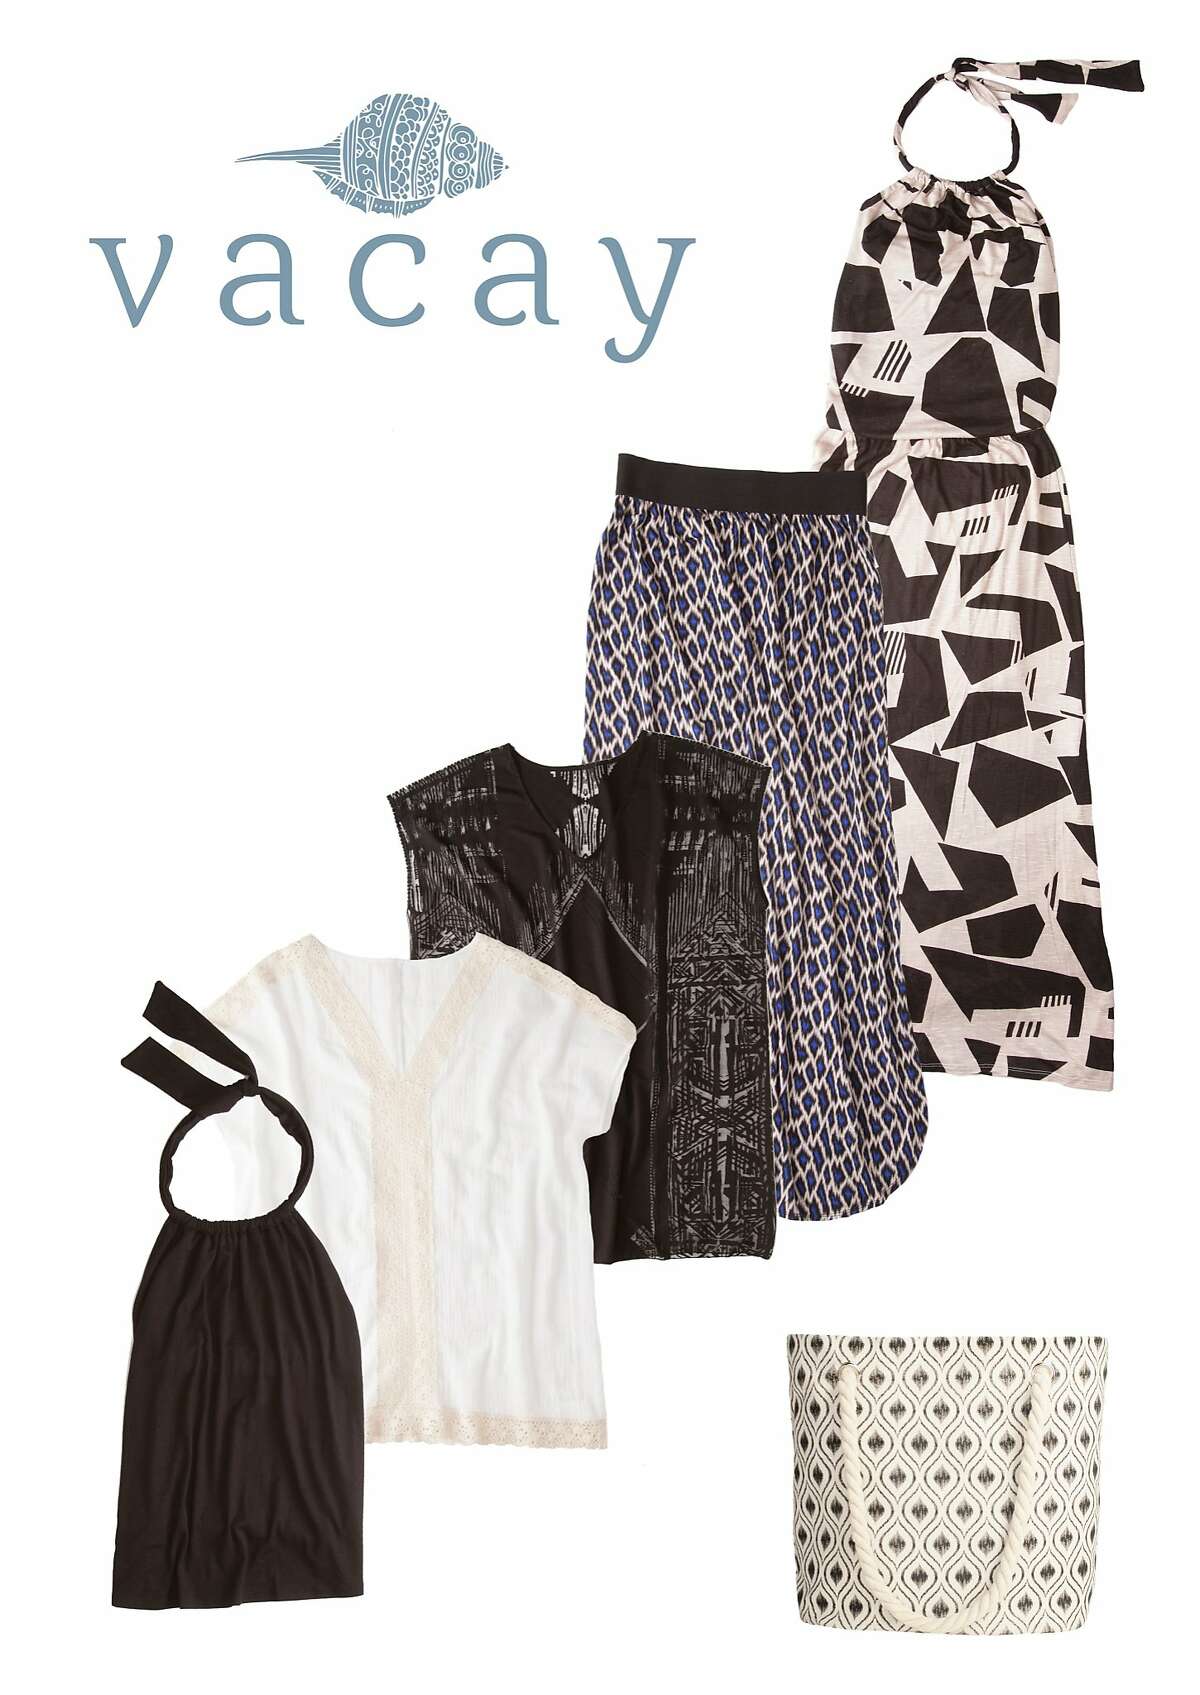 Vacay's new five-piece Fiji collection comes out July 5 and is available at http://vacaystyle.com/.